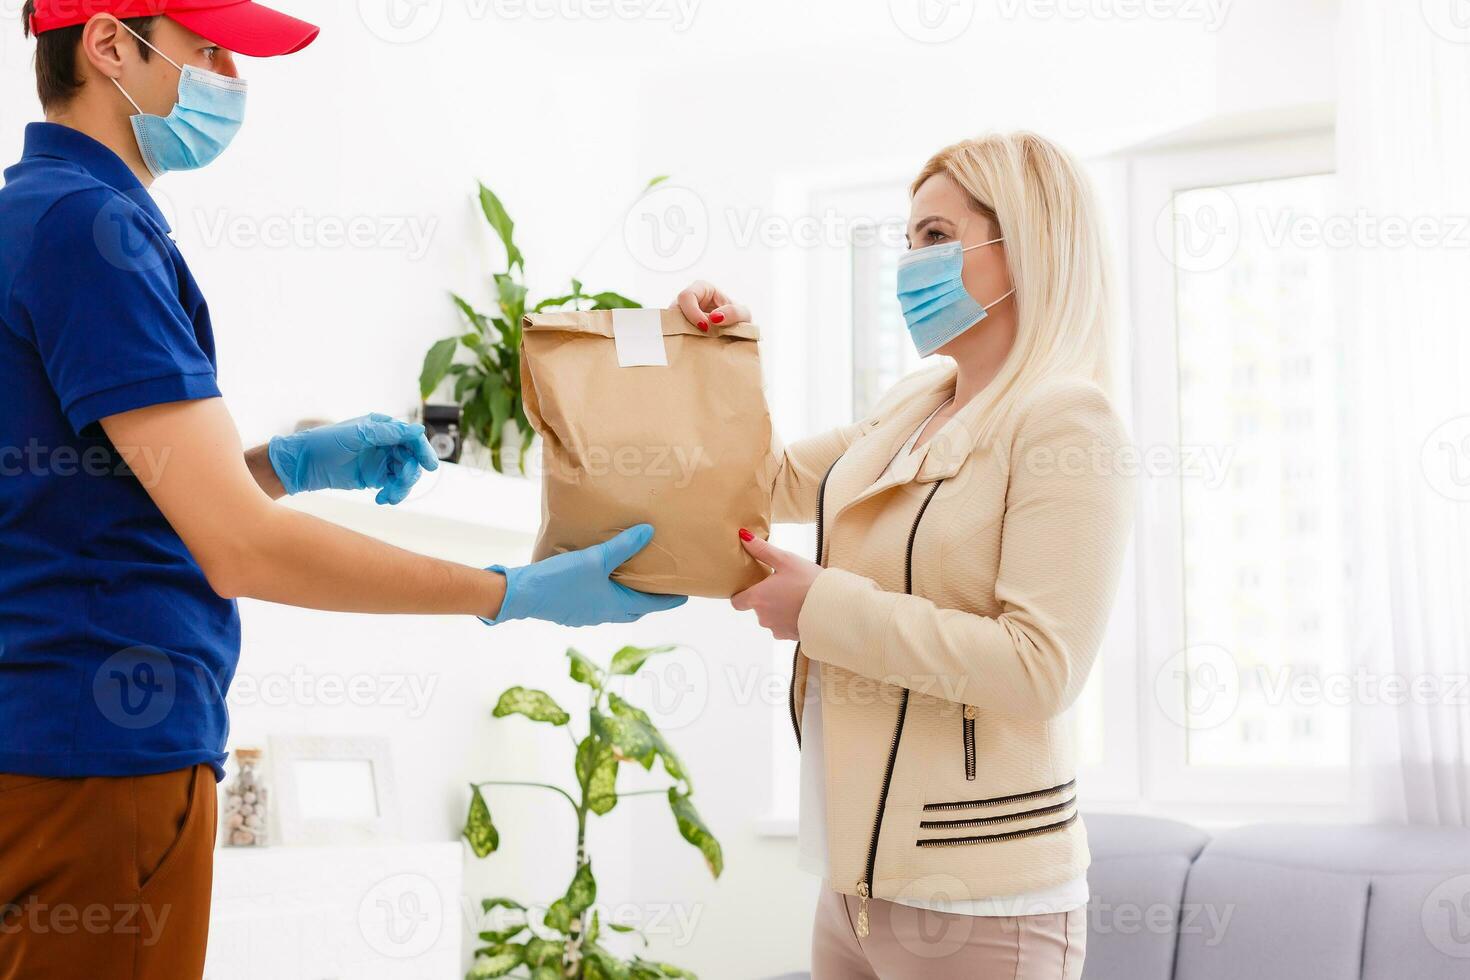 Man from delivery service in red cap, in protective mask and gloves giving food order and holding boxes over white background photo